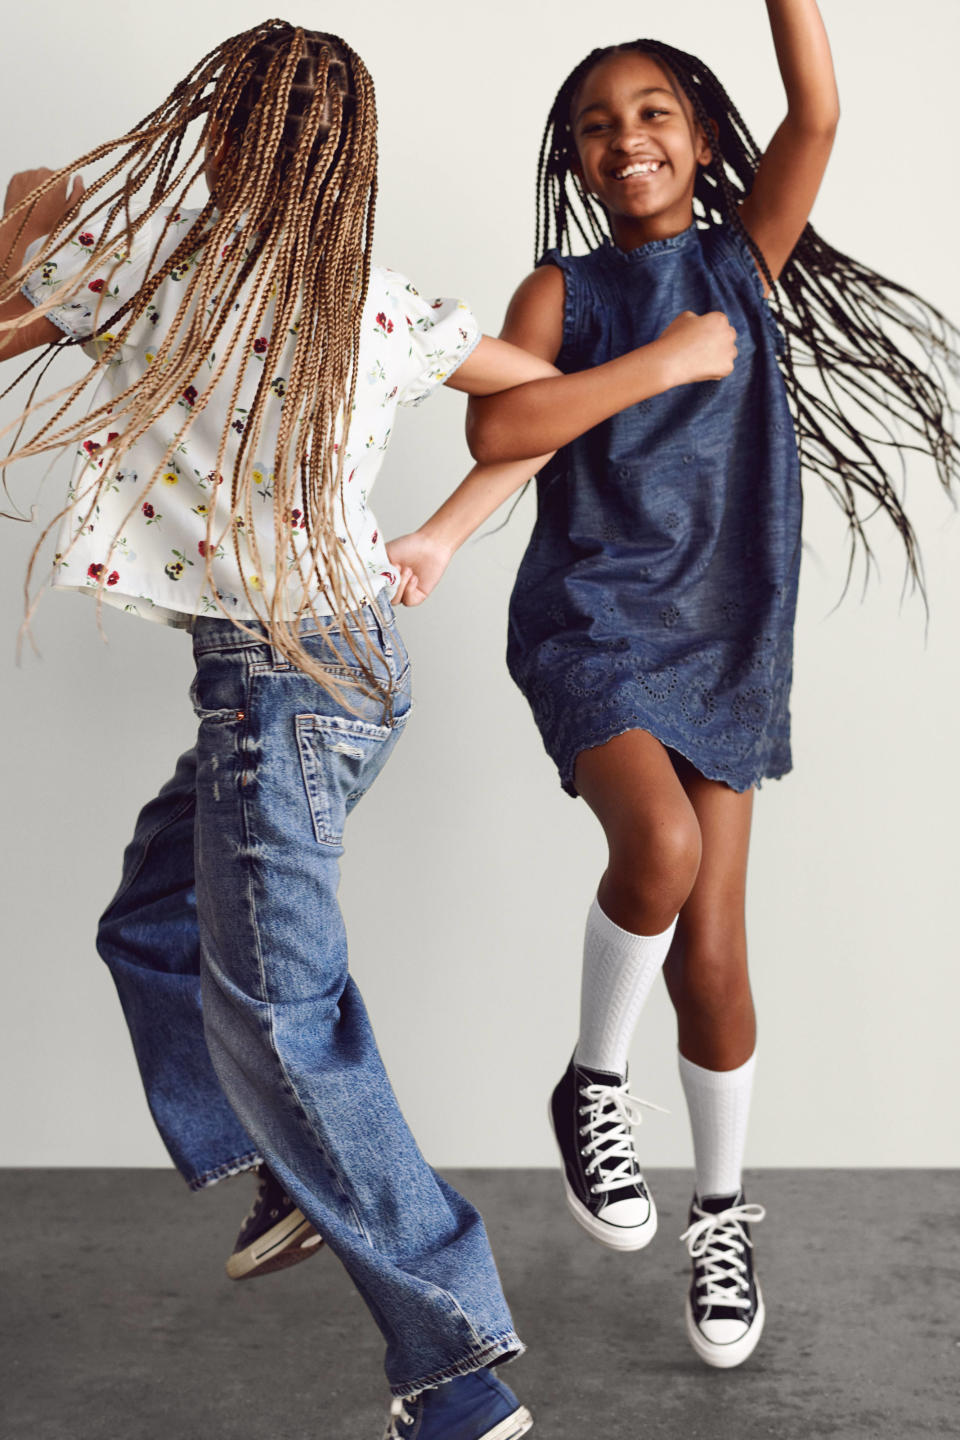 Gap x Dôen Campaign with Lily and Ruby Aldridge